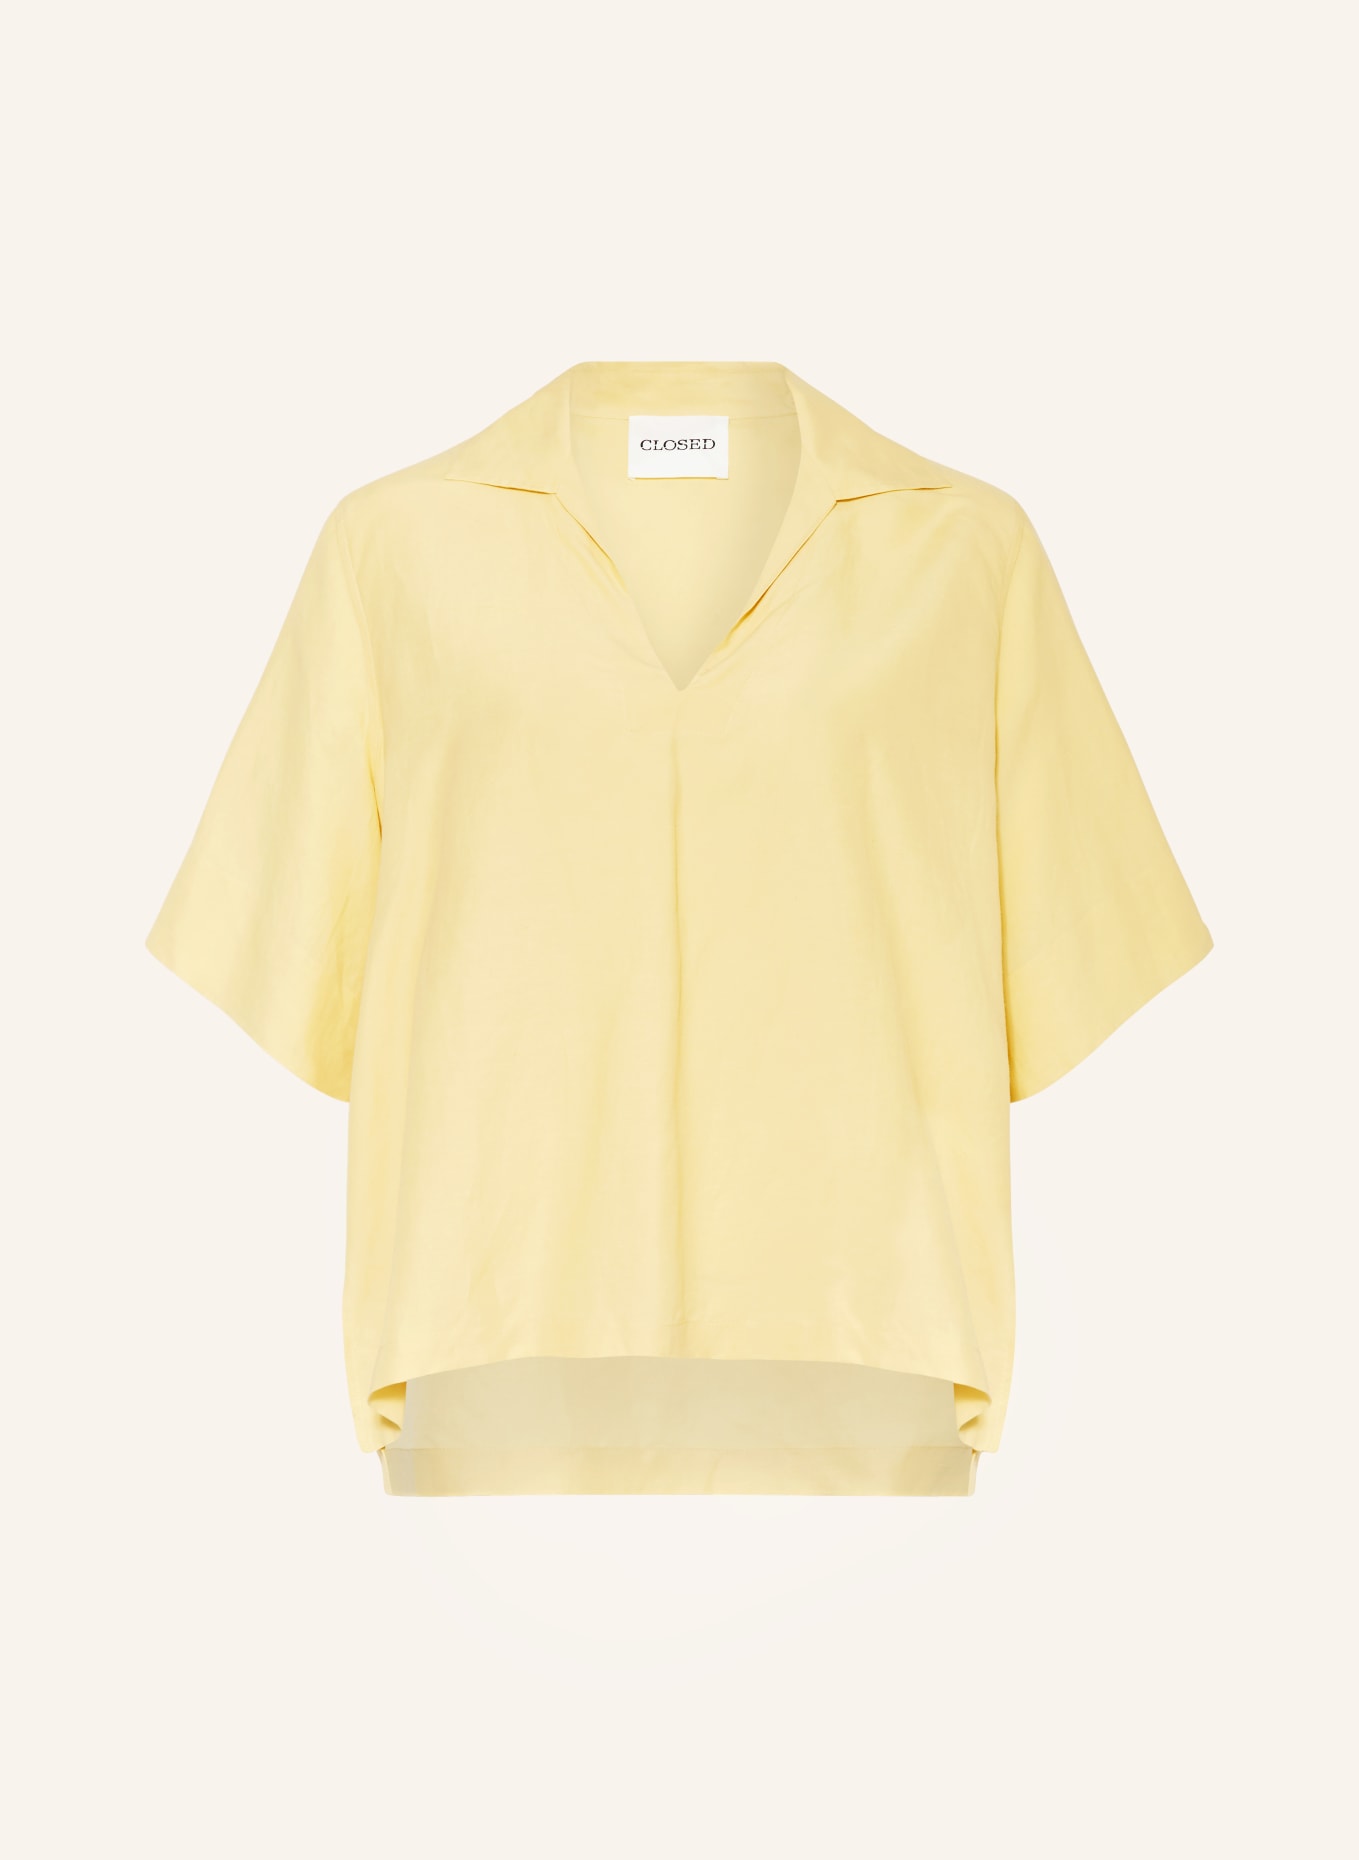 CLOSED T-shirt with linen, Color: LIGHT YELLOW (Image 1)